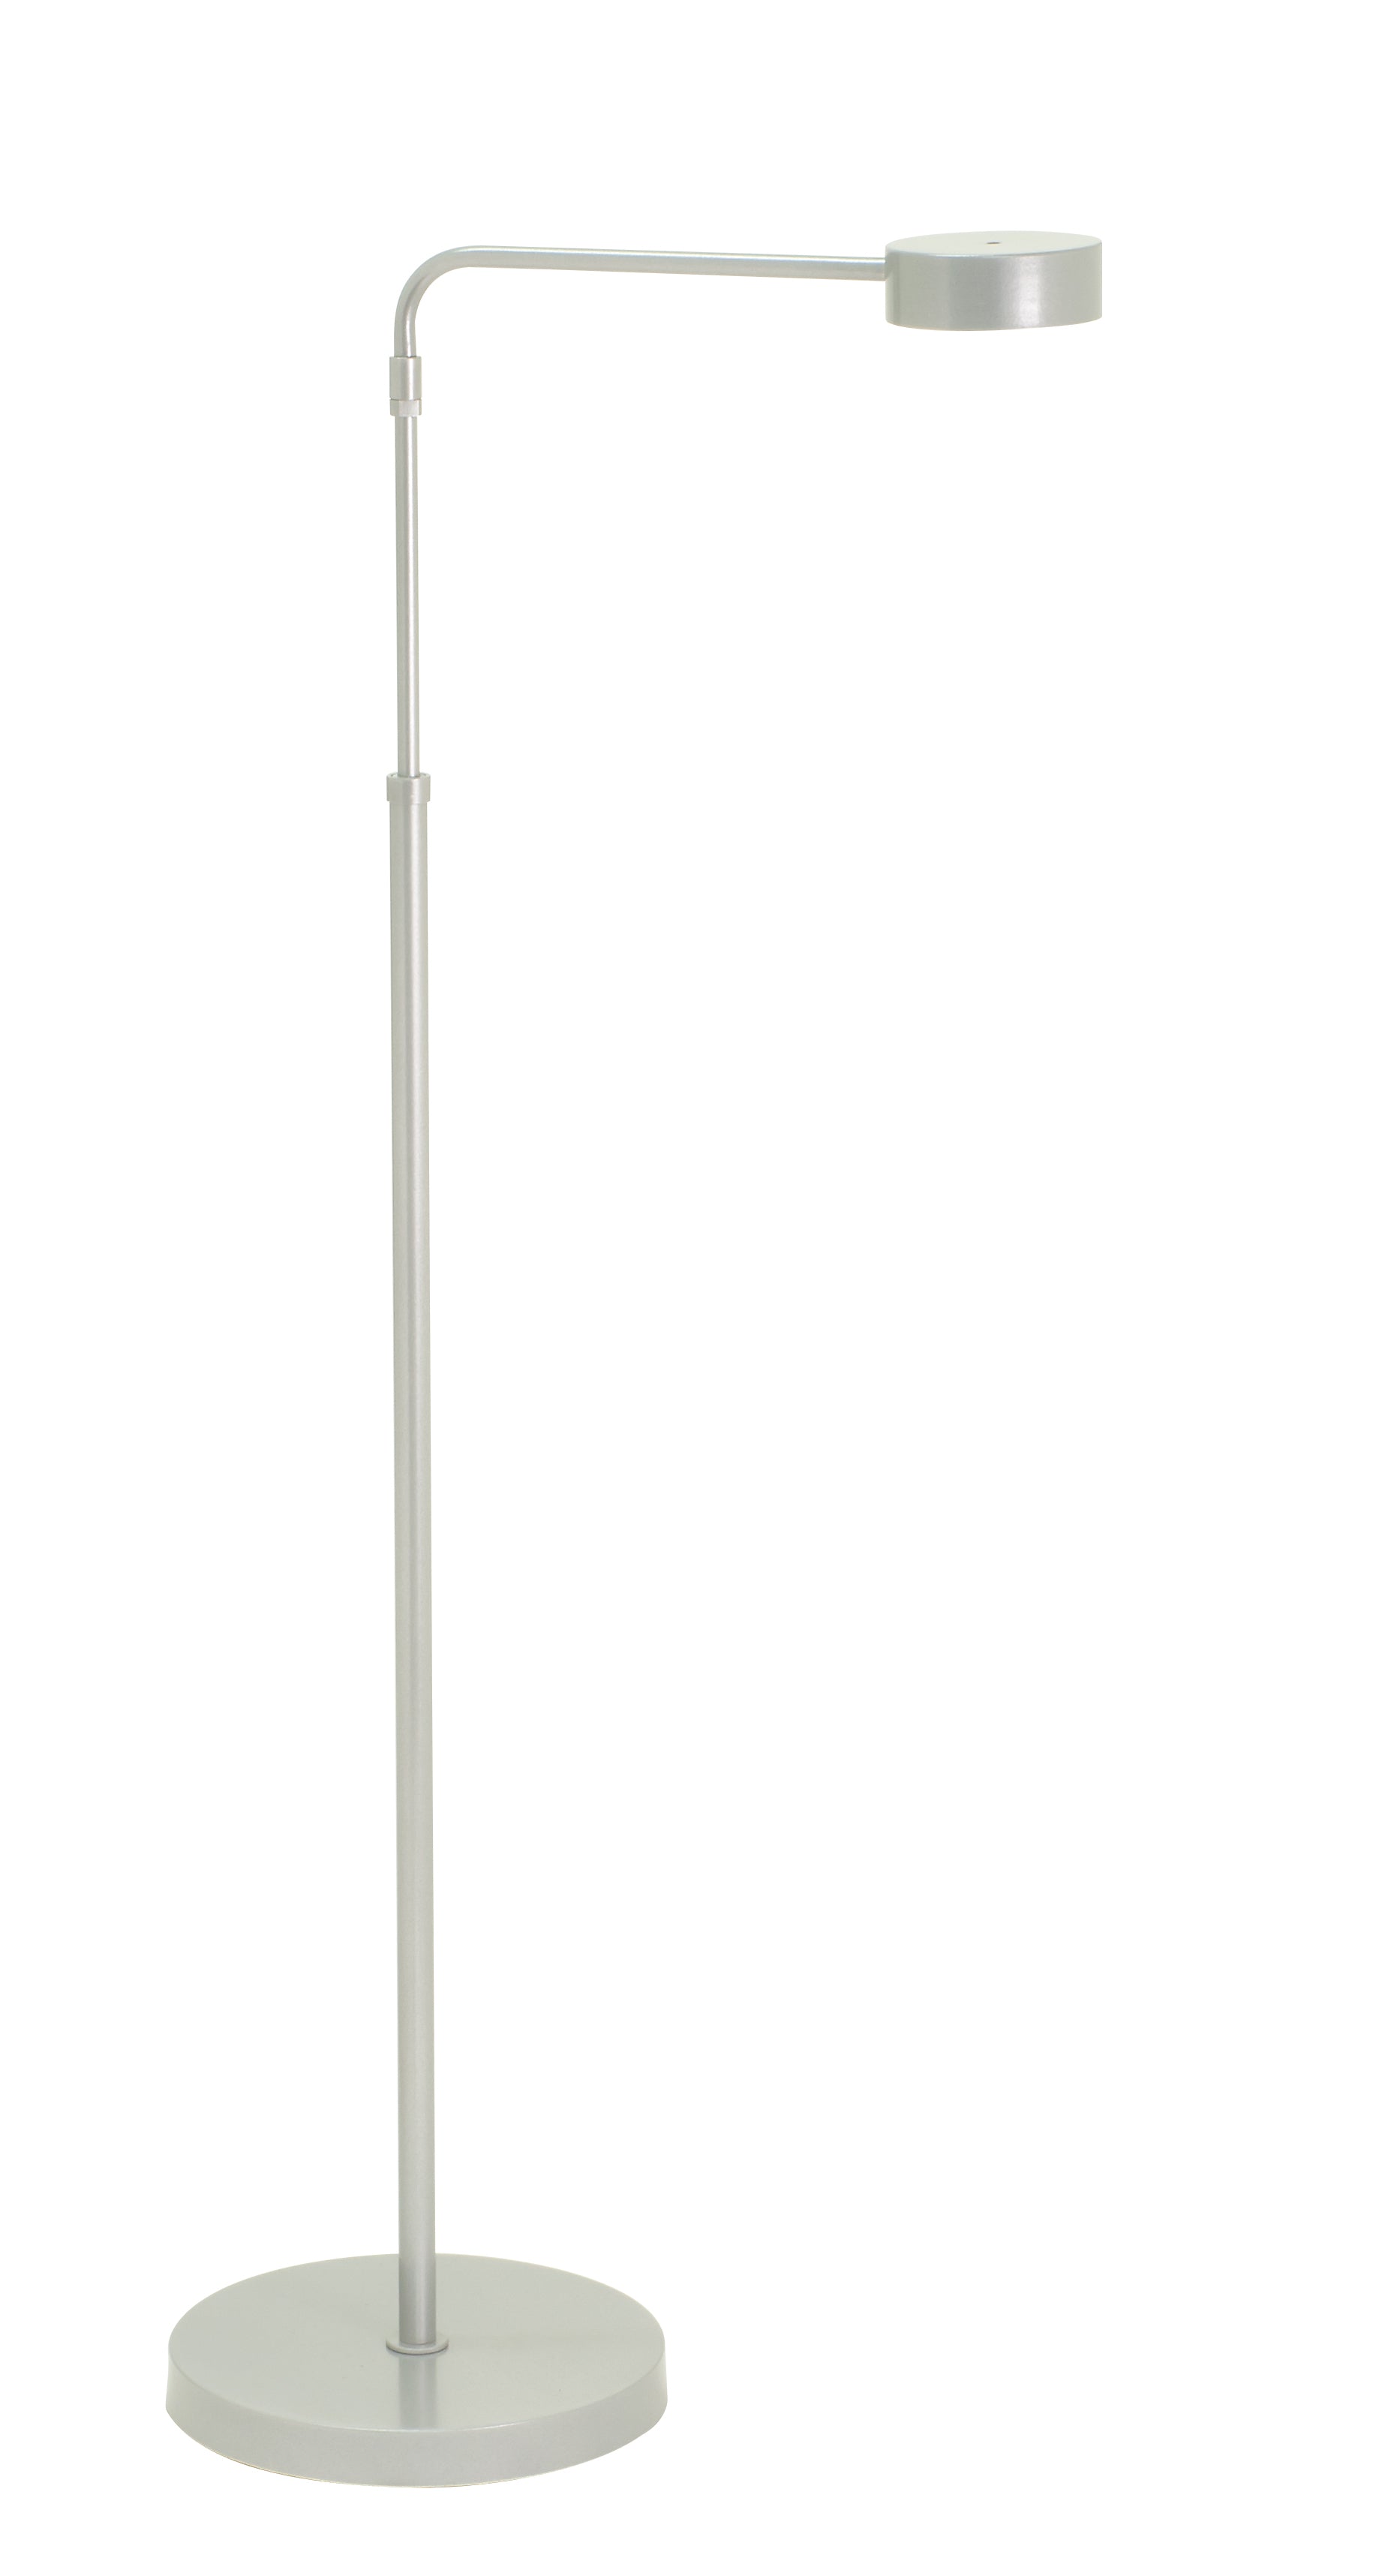 House of Troy Generation Adjustable LED Floor Lamp in Platinum Gray G400-PG